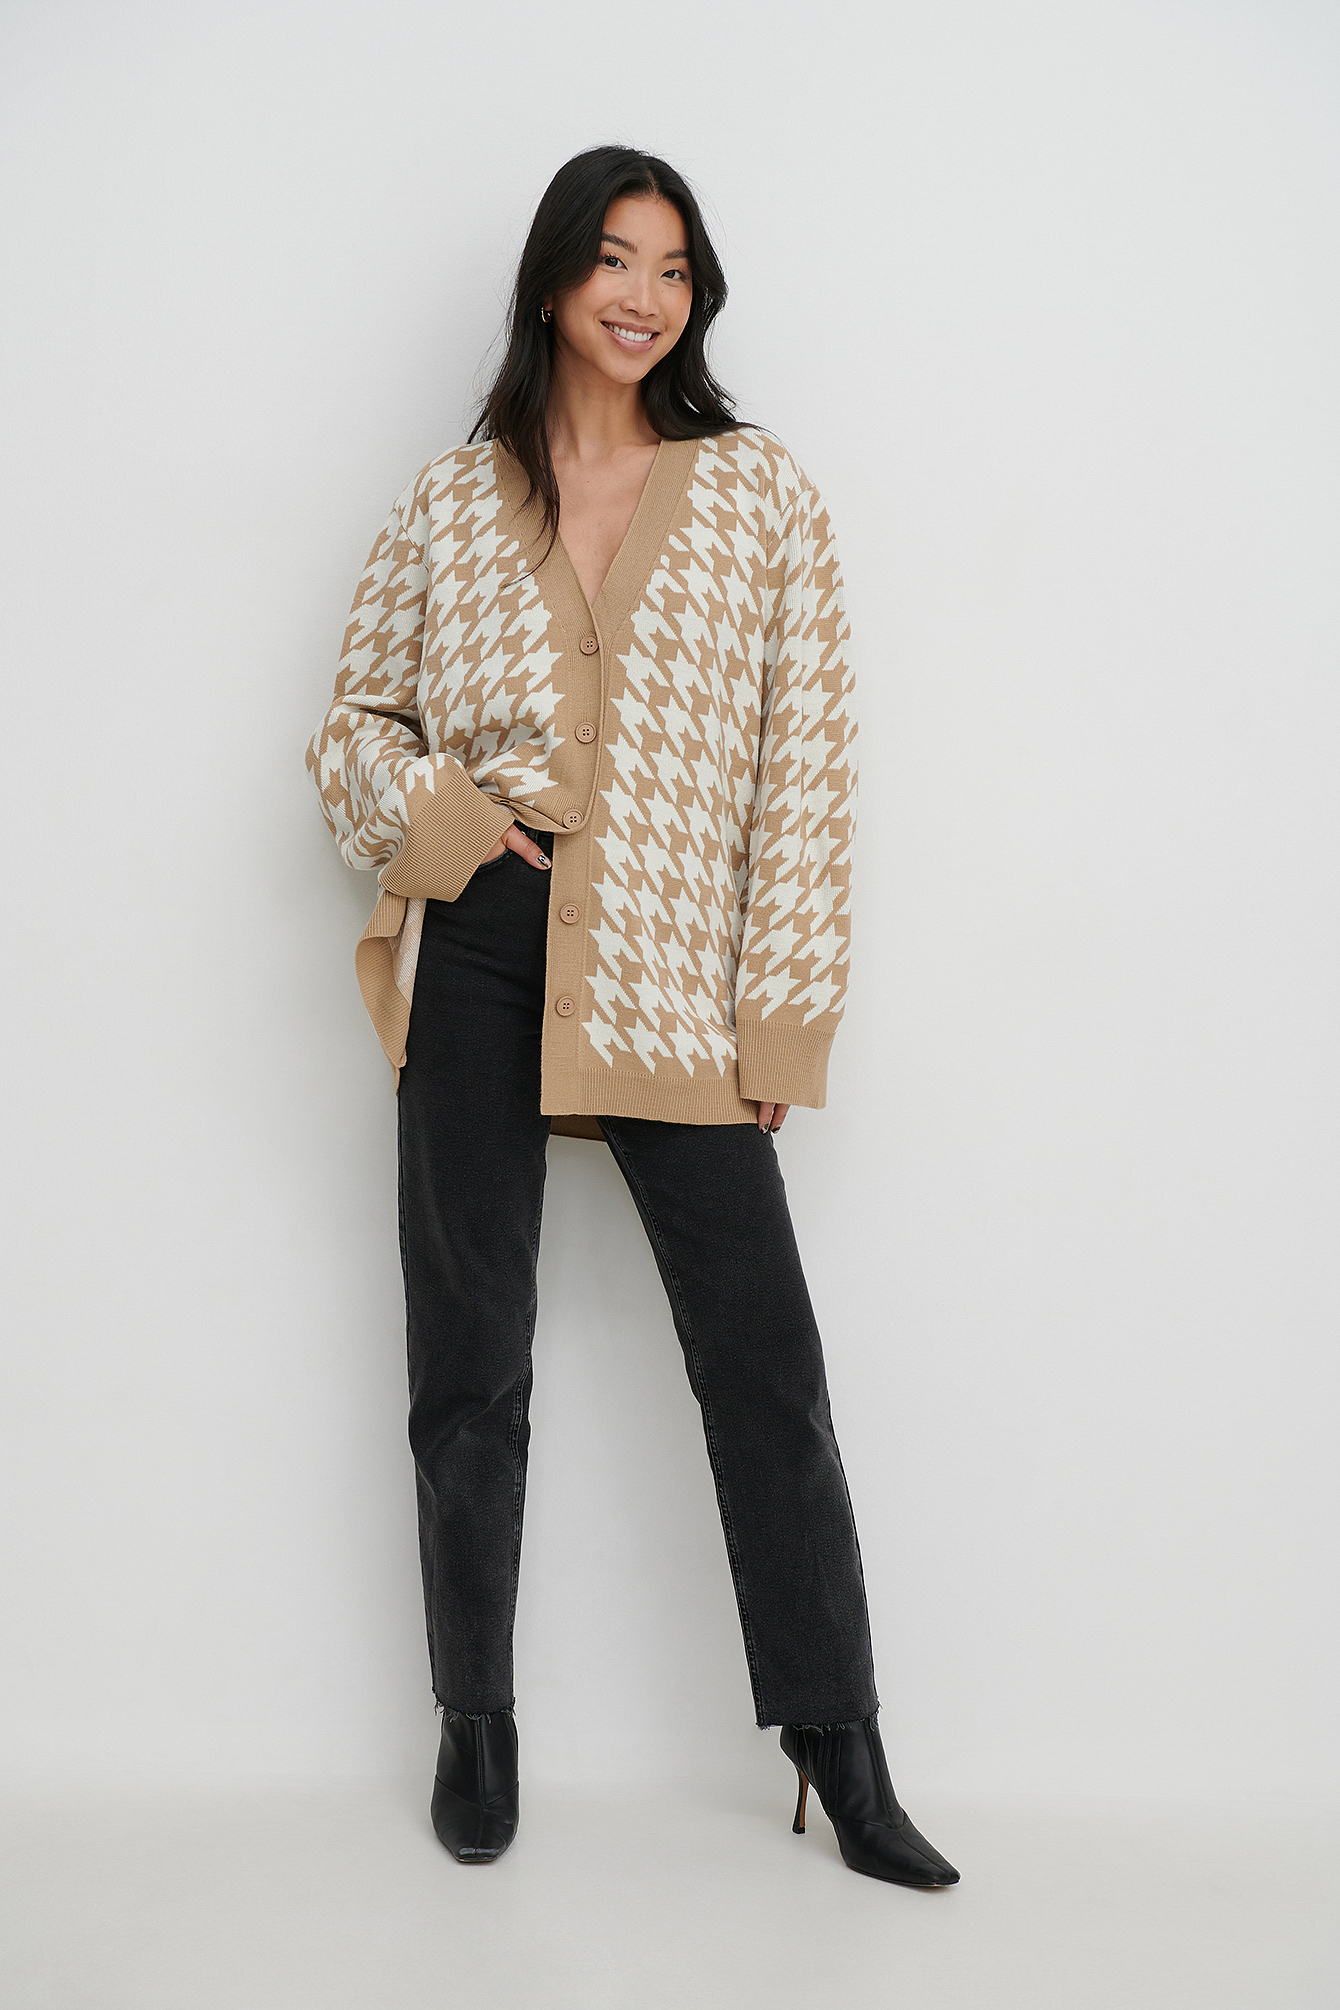 Houndstooth Long Cardigan Outfit.